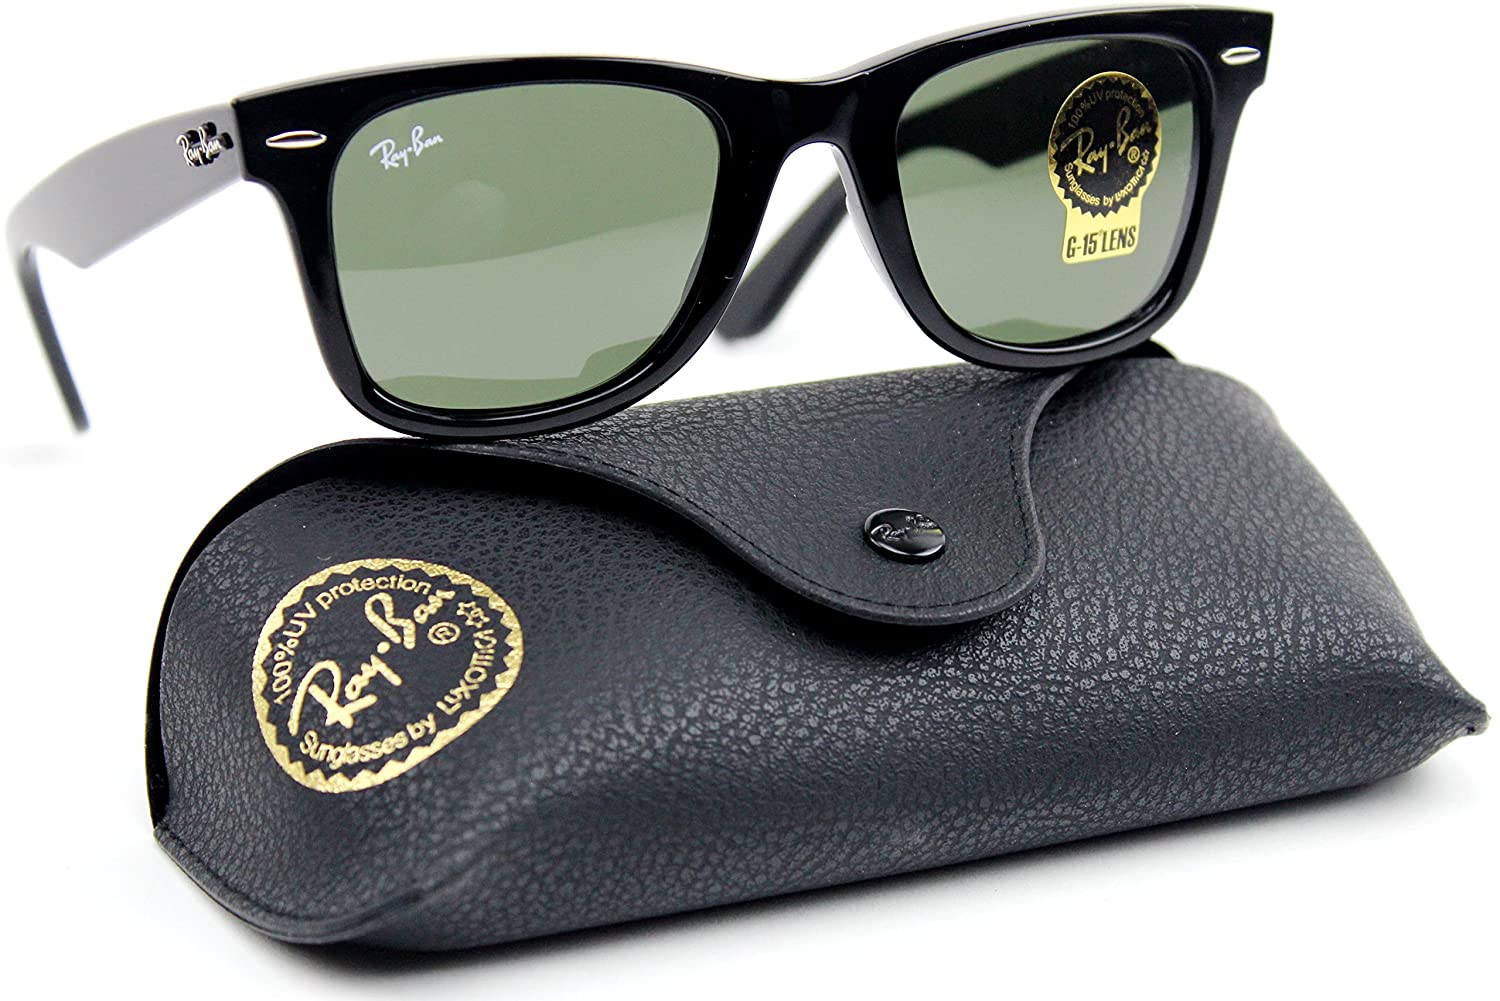 Now Get The Exclusive Ray Ban Power Glass From Our Exclusive Store Burman  Brother